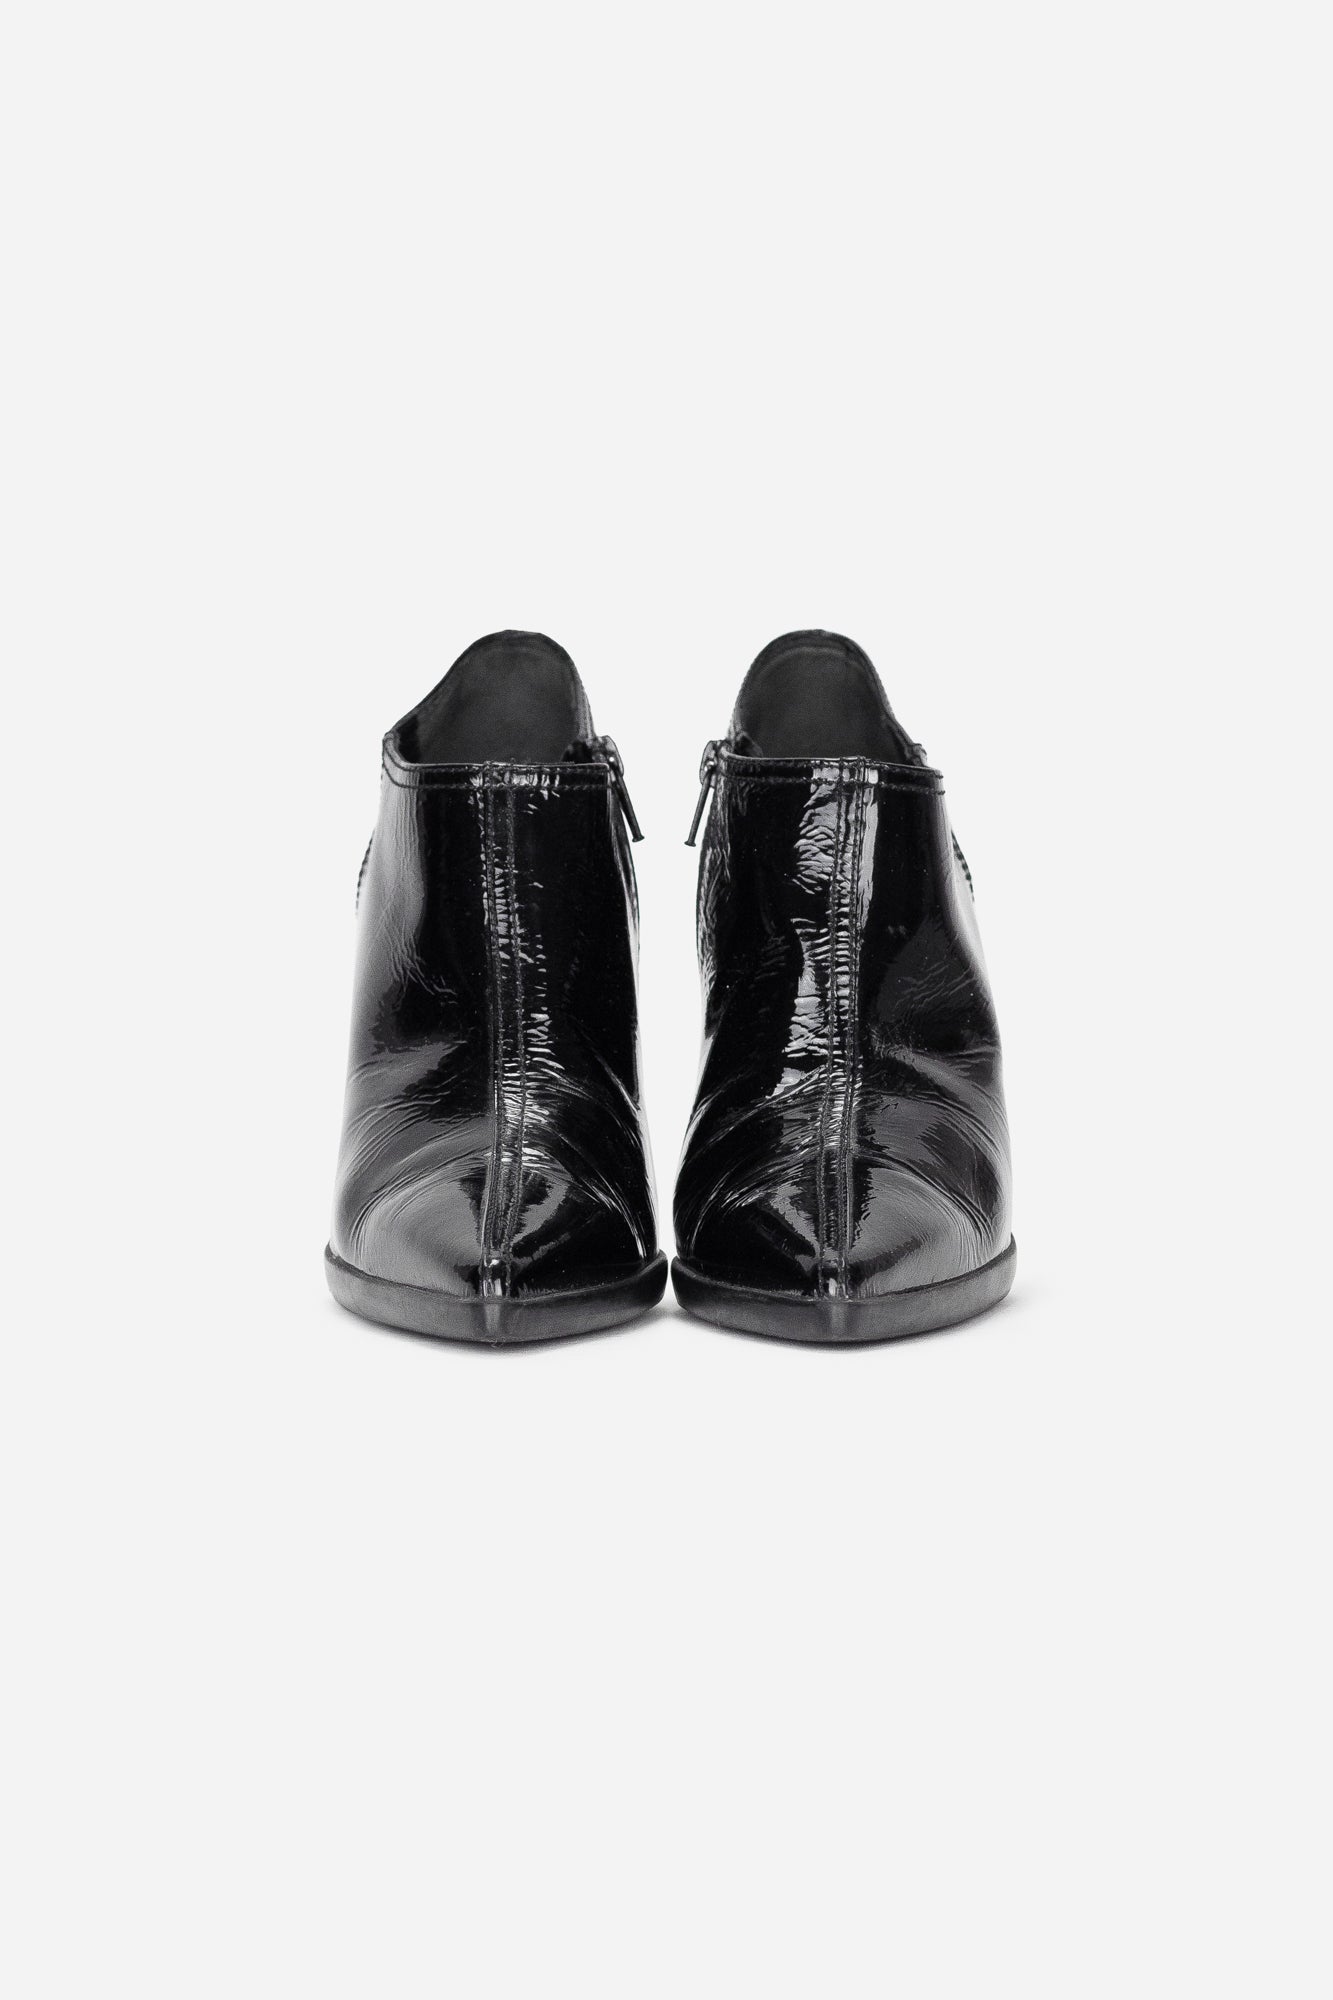 Black Patent Leather Pointed Toe Booties - So Over It Luxury Consignment